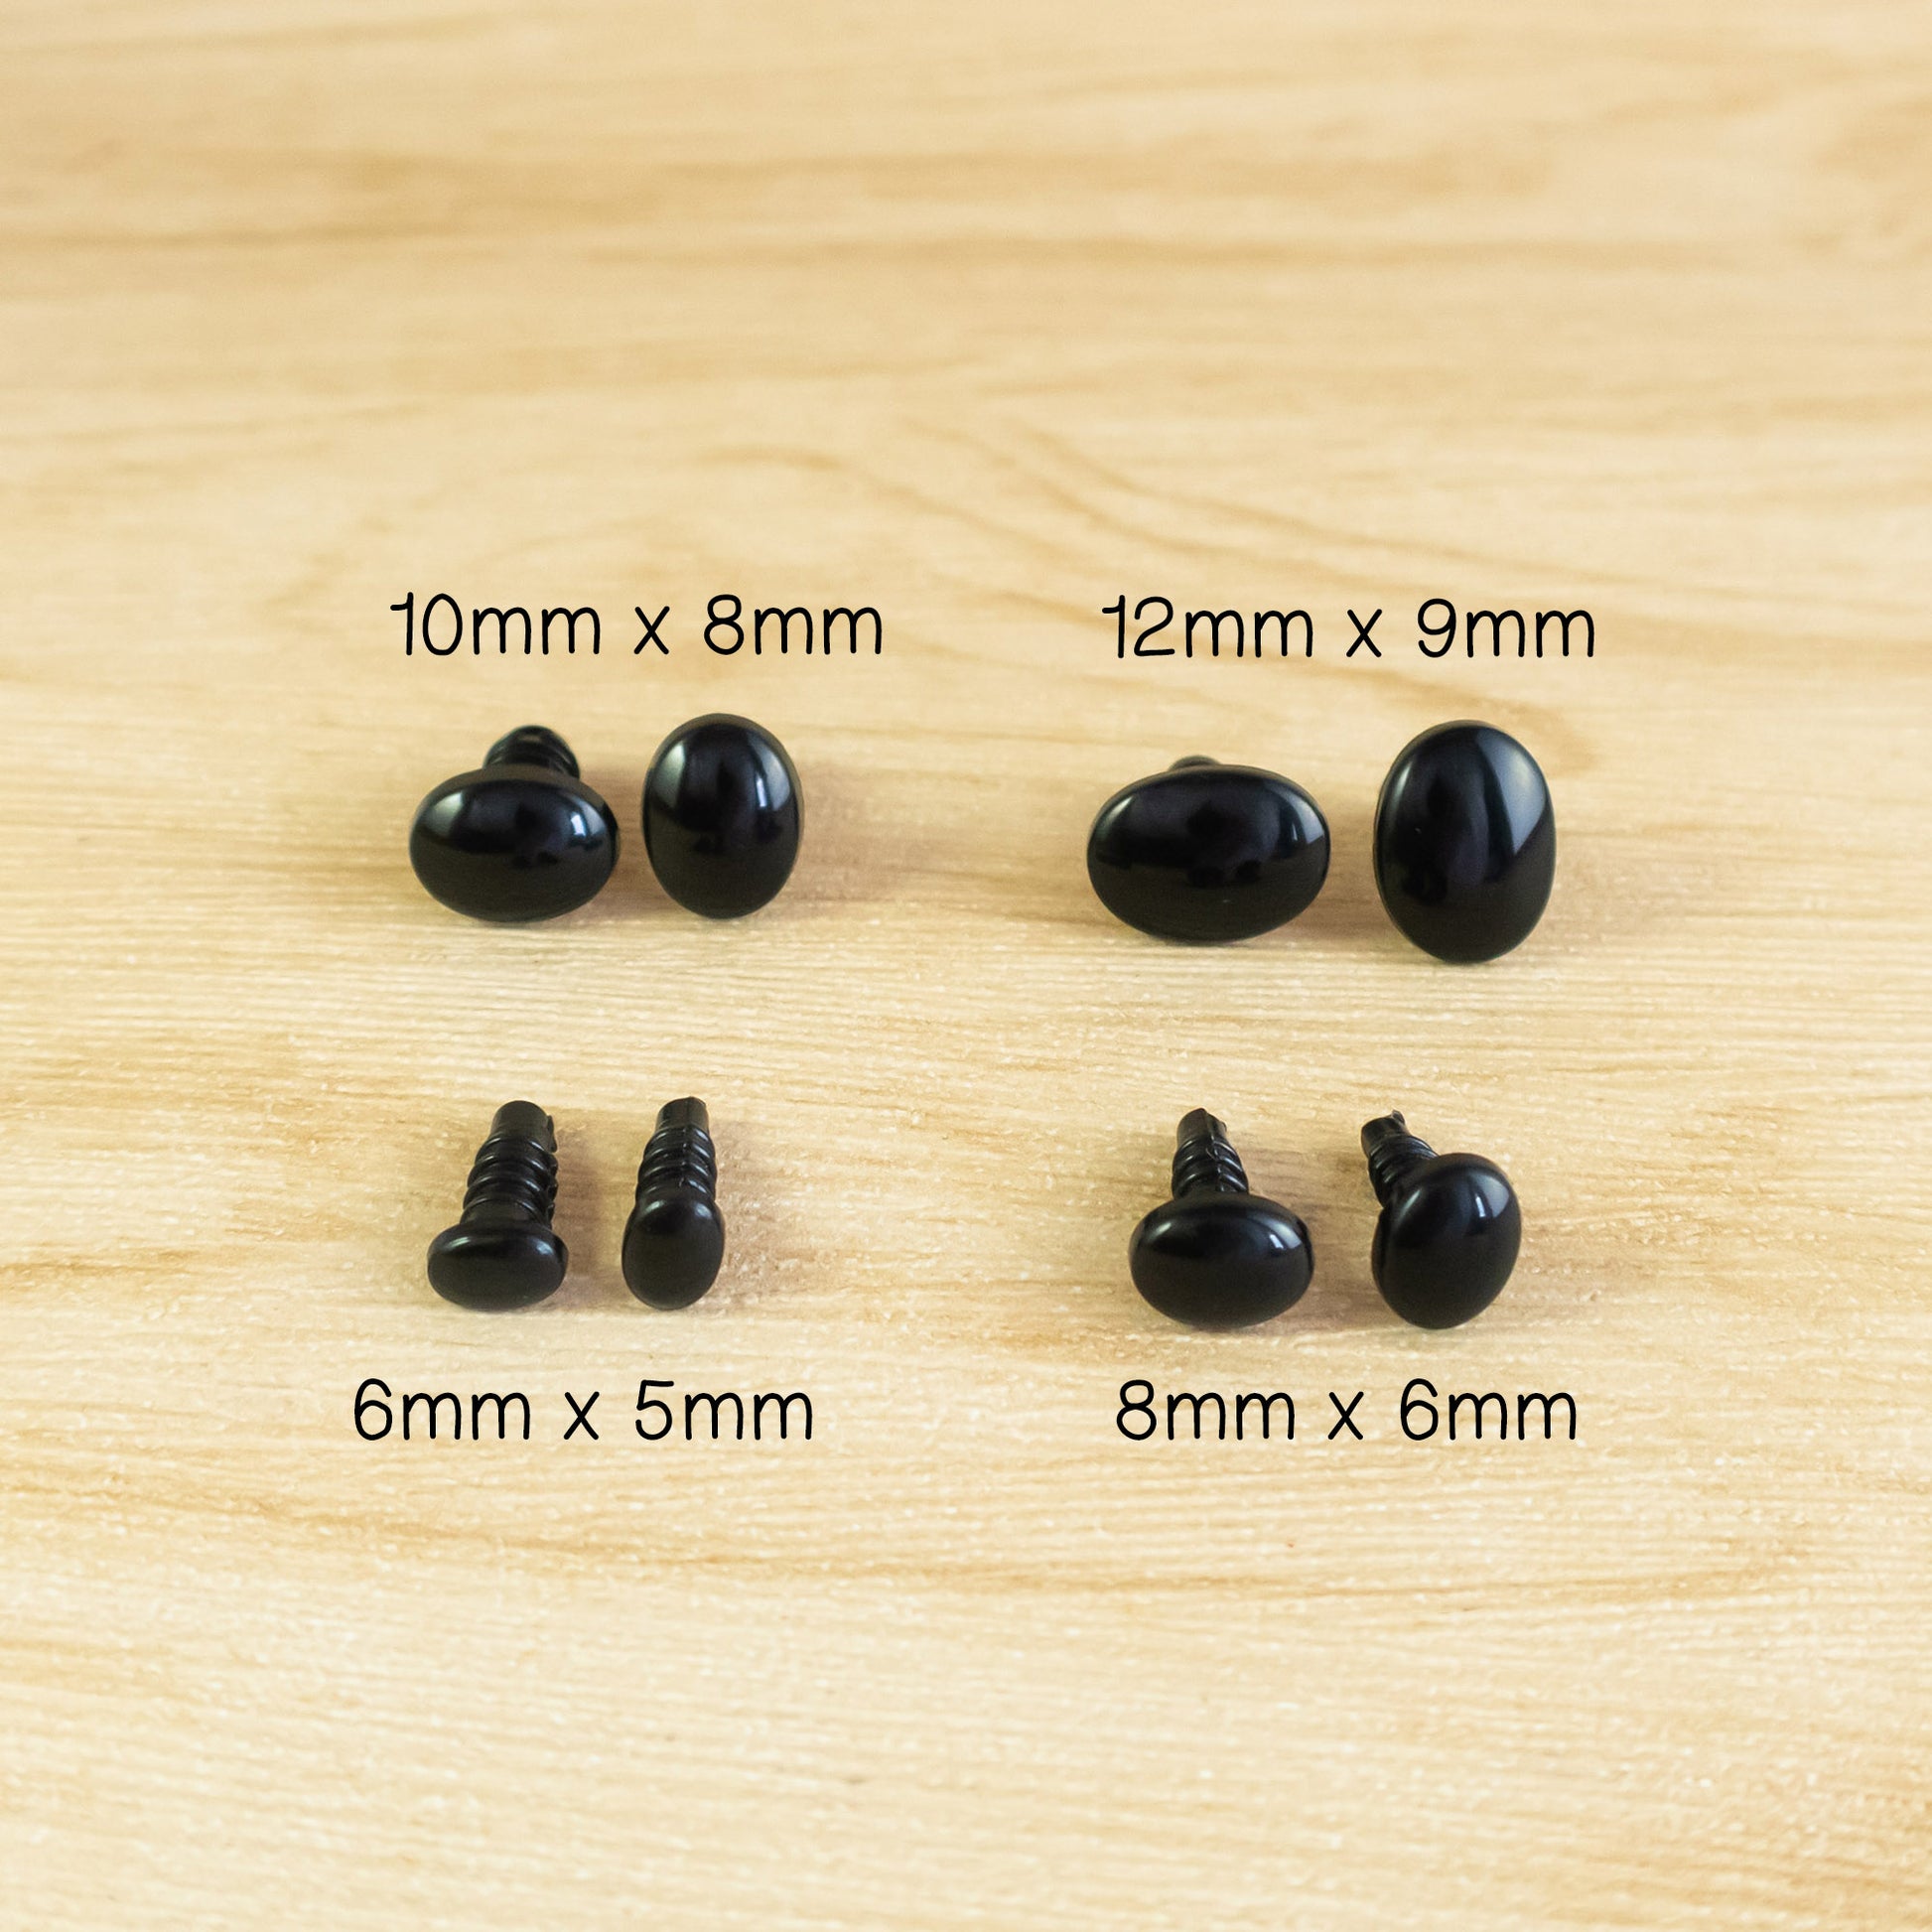 Various sizes of black oval safety eyes and noses for stuffed toys